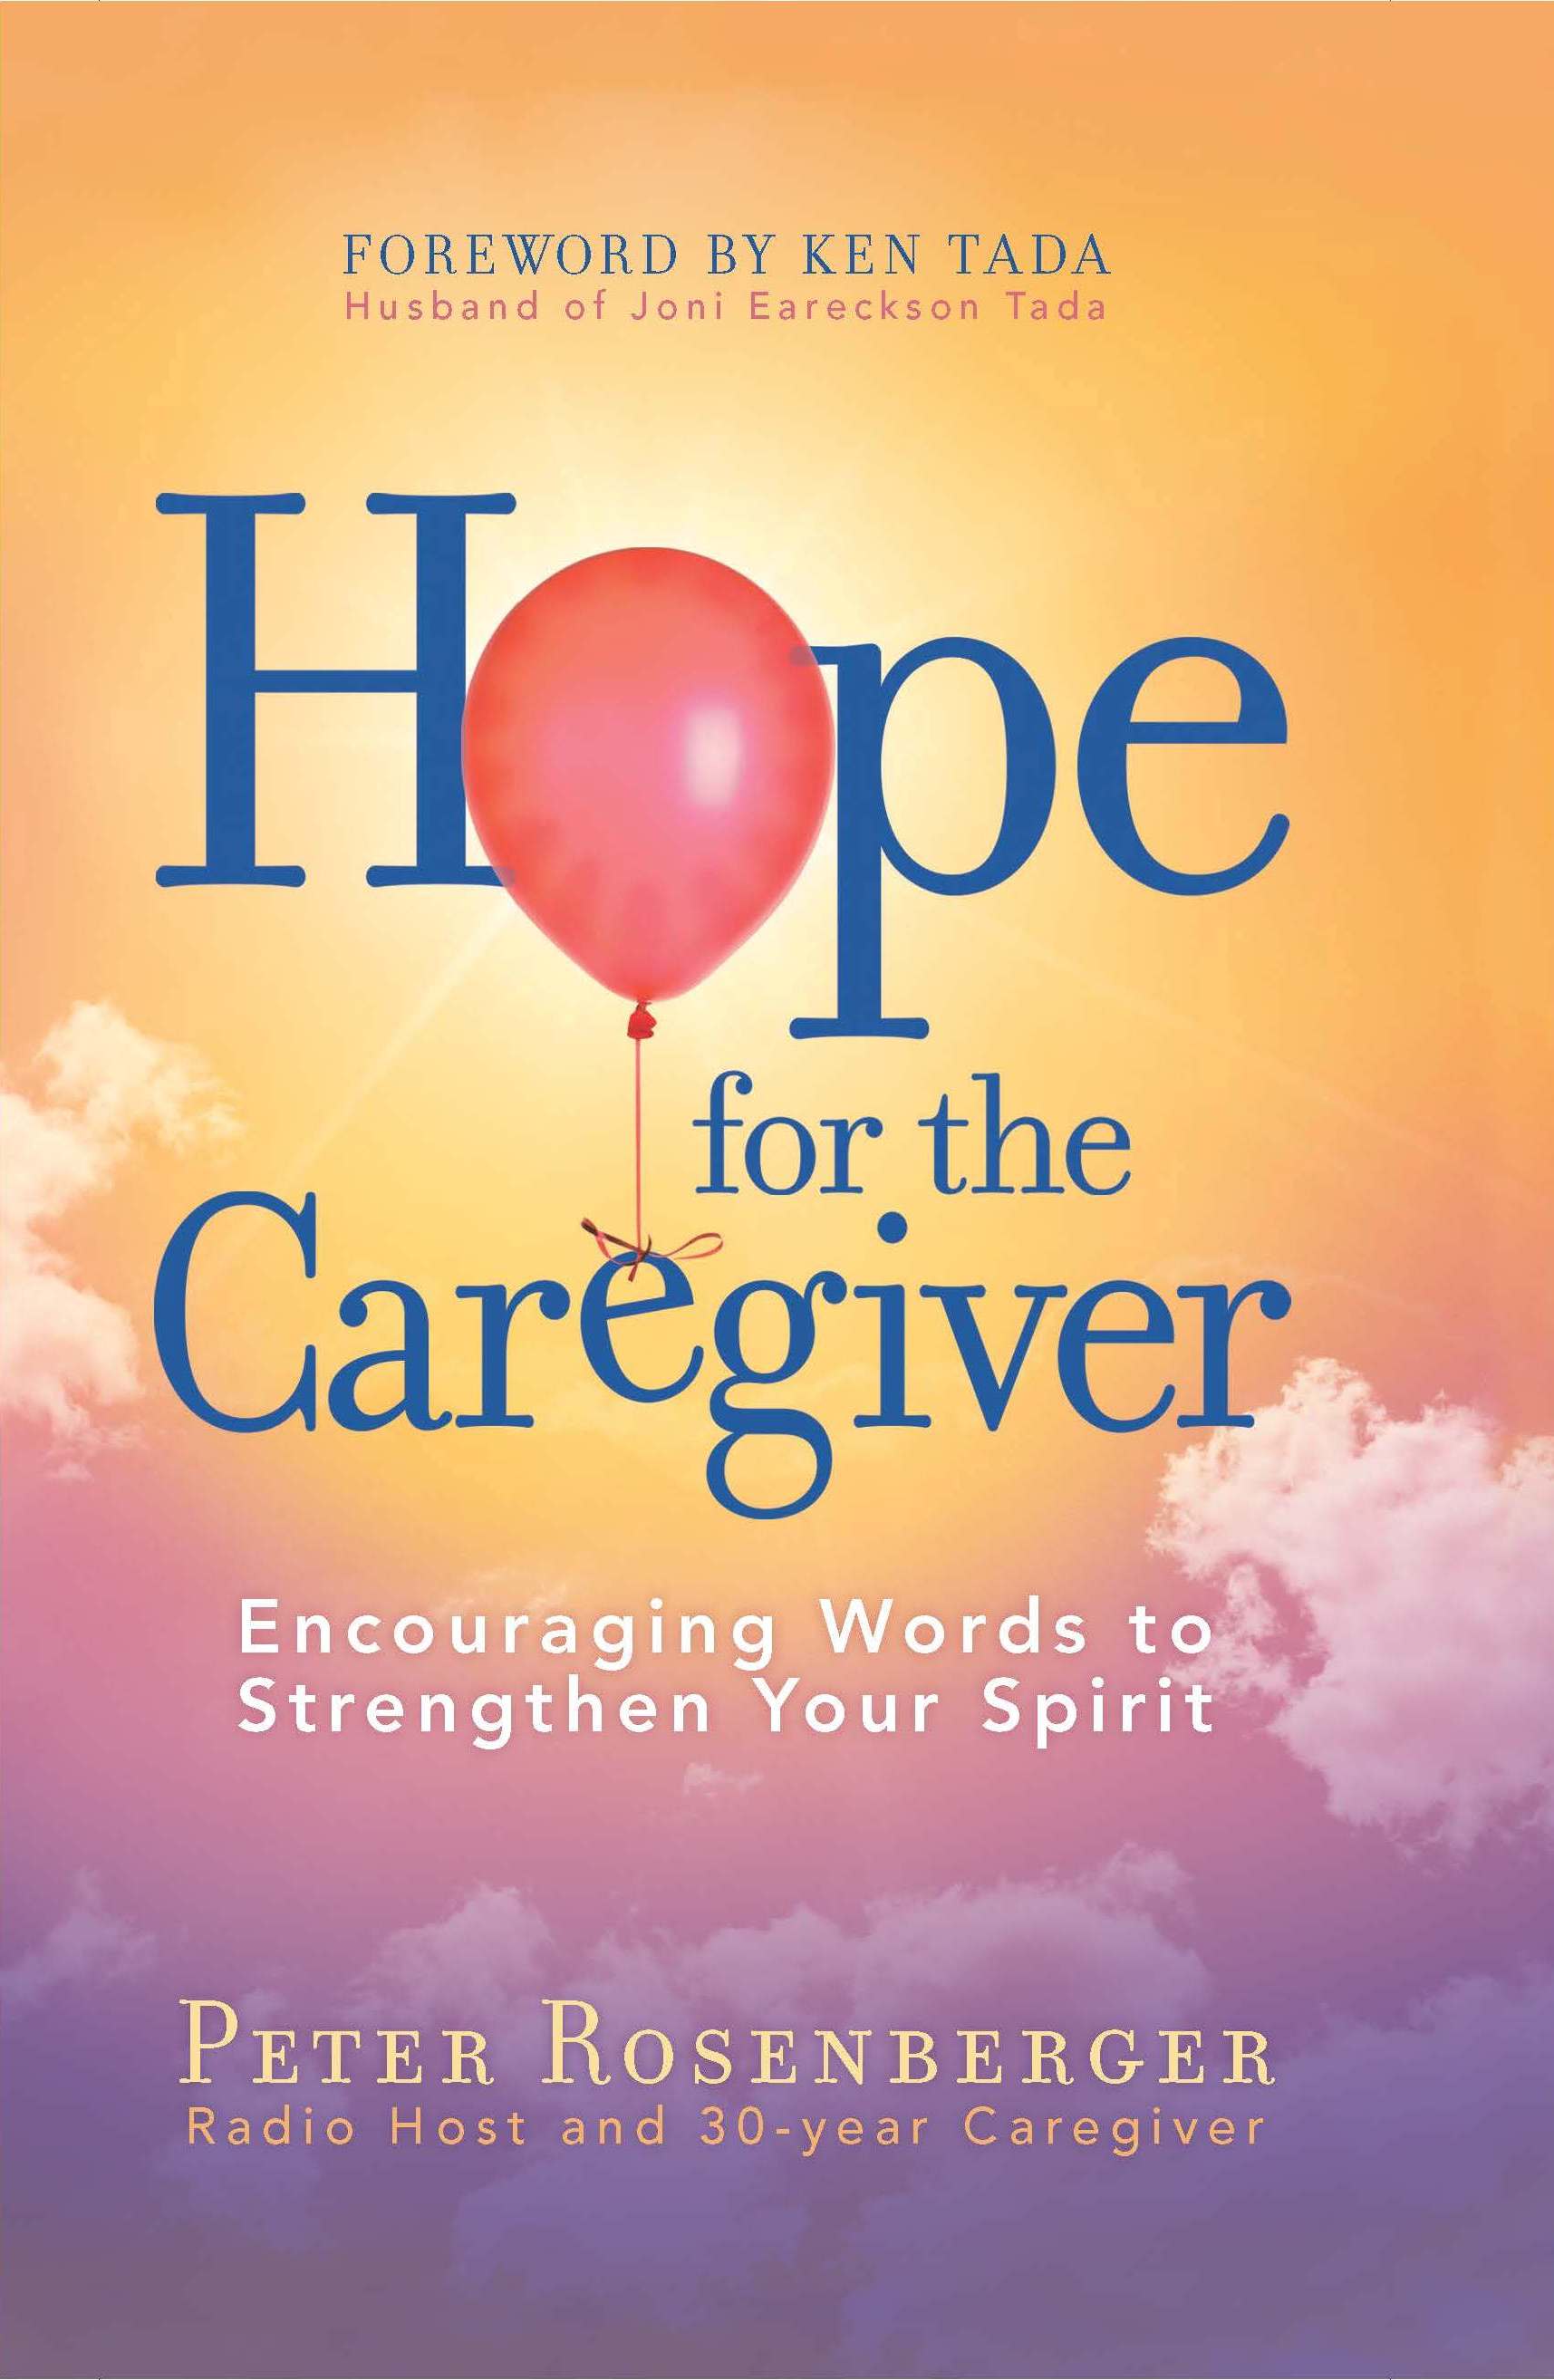 Caregivers and Addictions